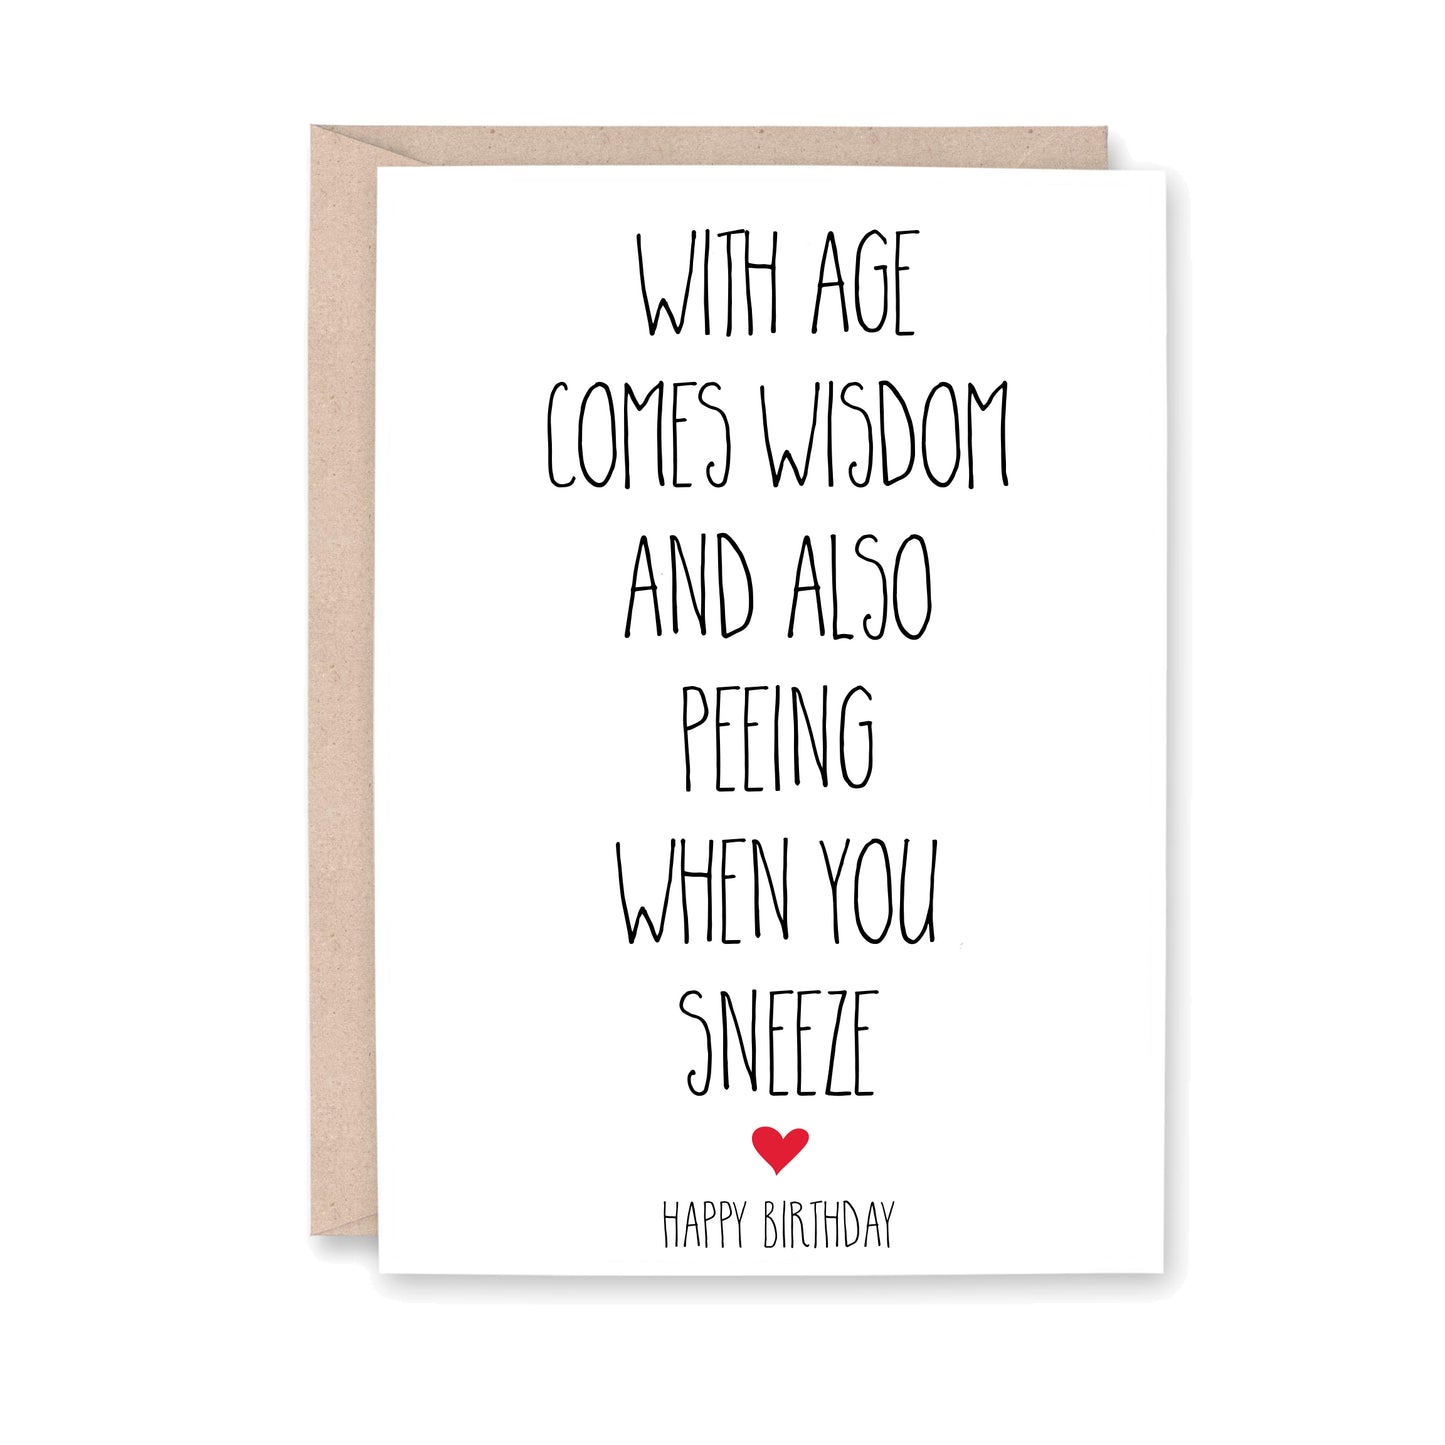 With age comes wisdom and also peeing when you sneeze - Happy Birthday. With a small red heart at the bottom of the card